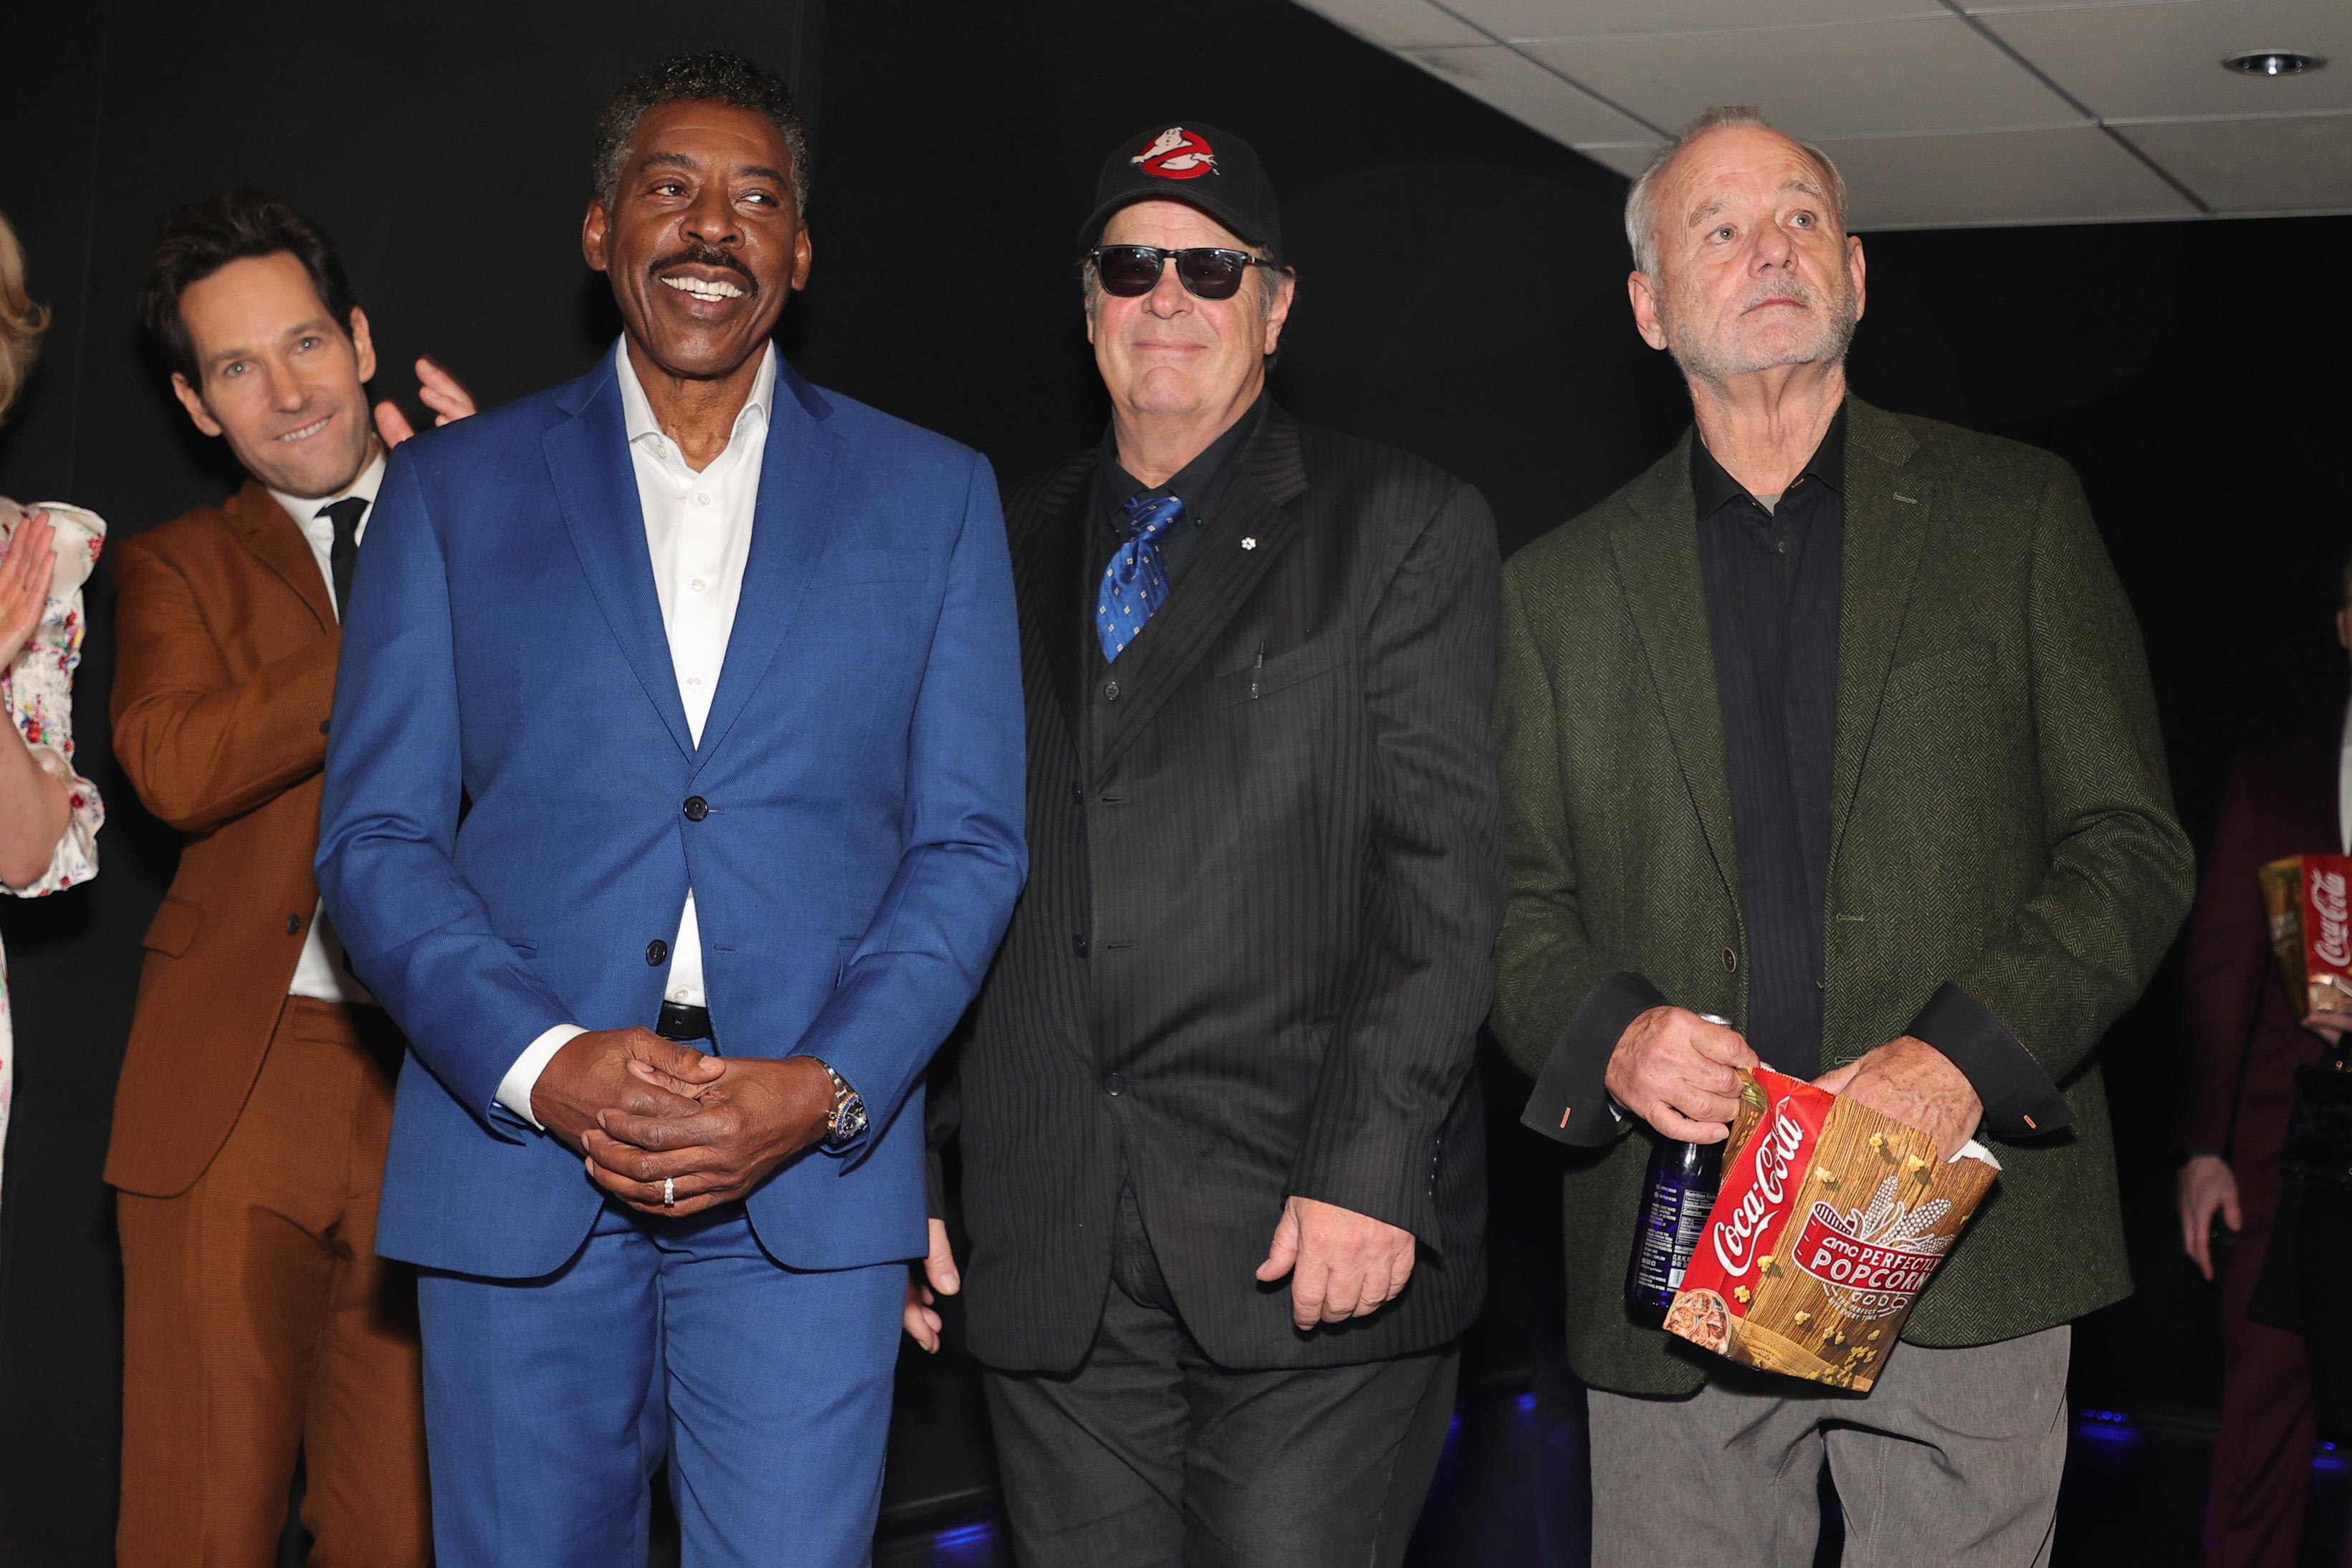 Paul Rudd, Ernie Hudson, Dan Aykroyd, and Bill Murray at the world premiere of "Ghostbusters: Afterlife," 2021  | Source: Getty Images